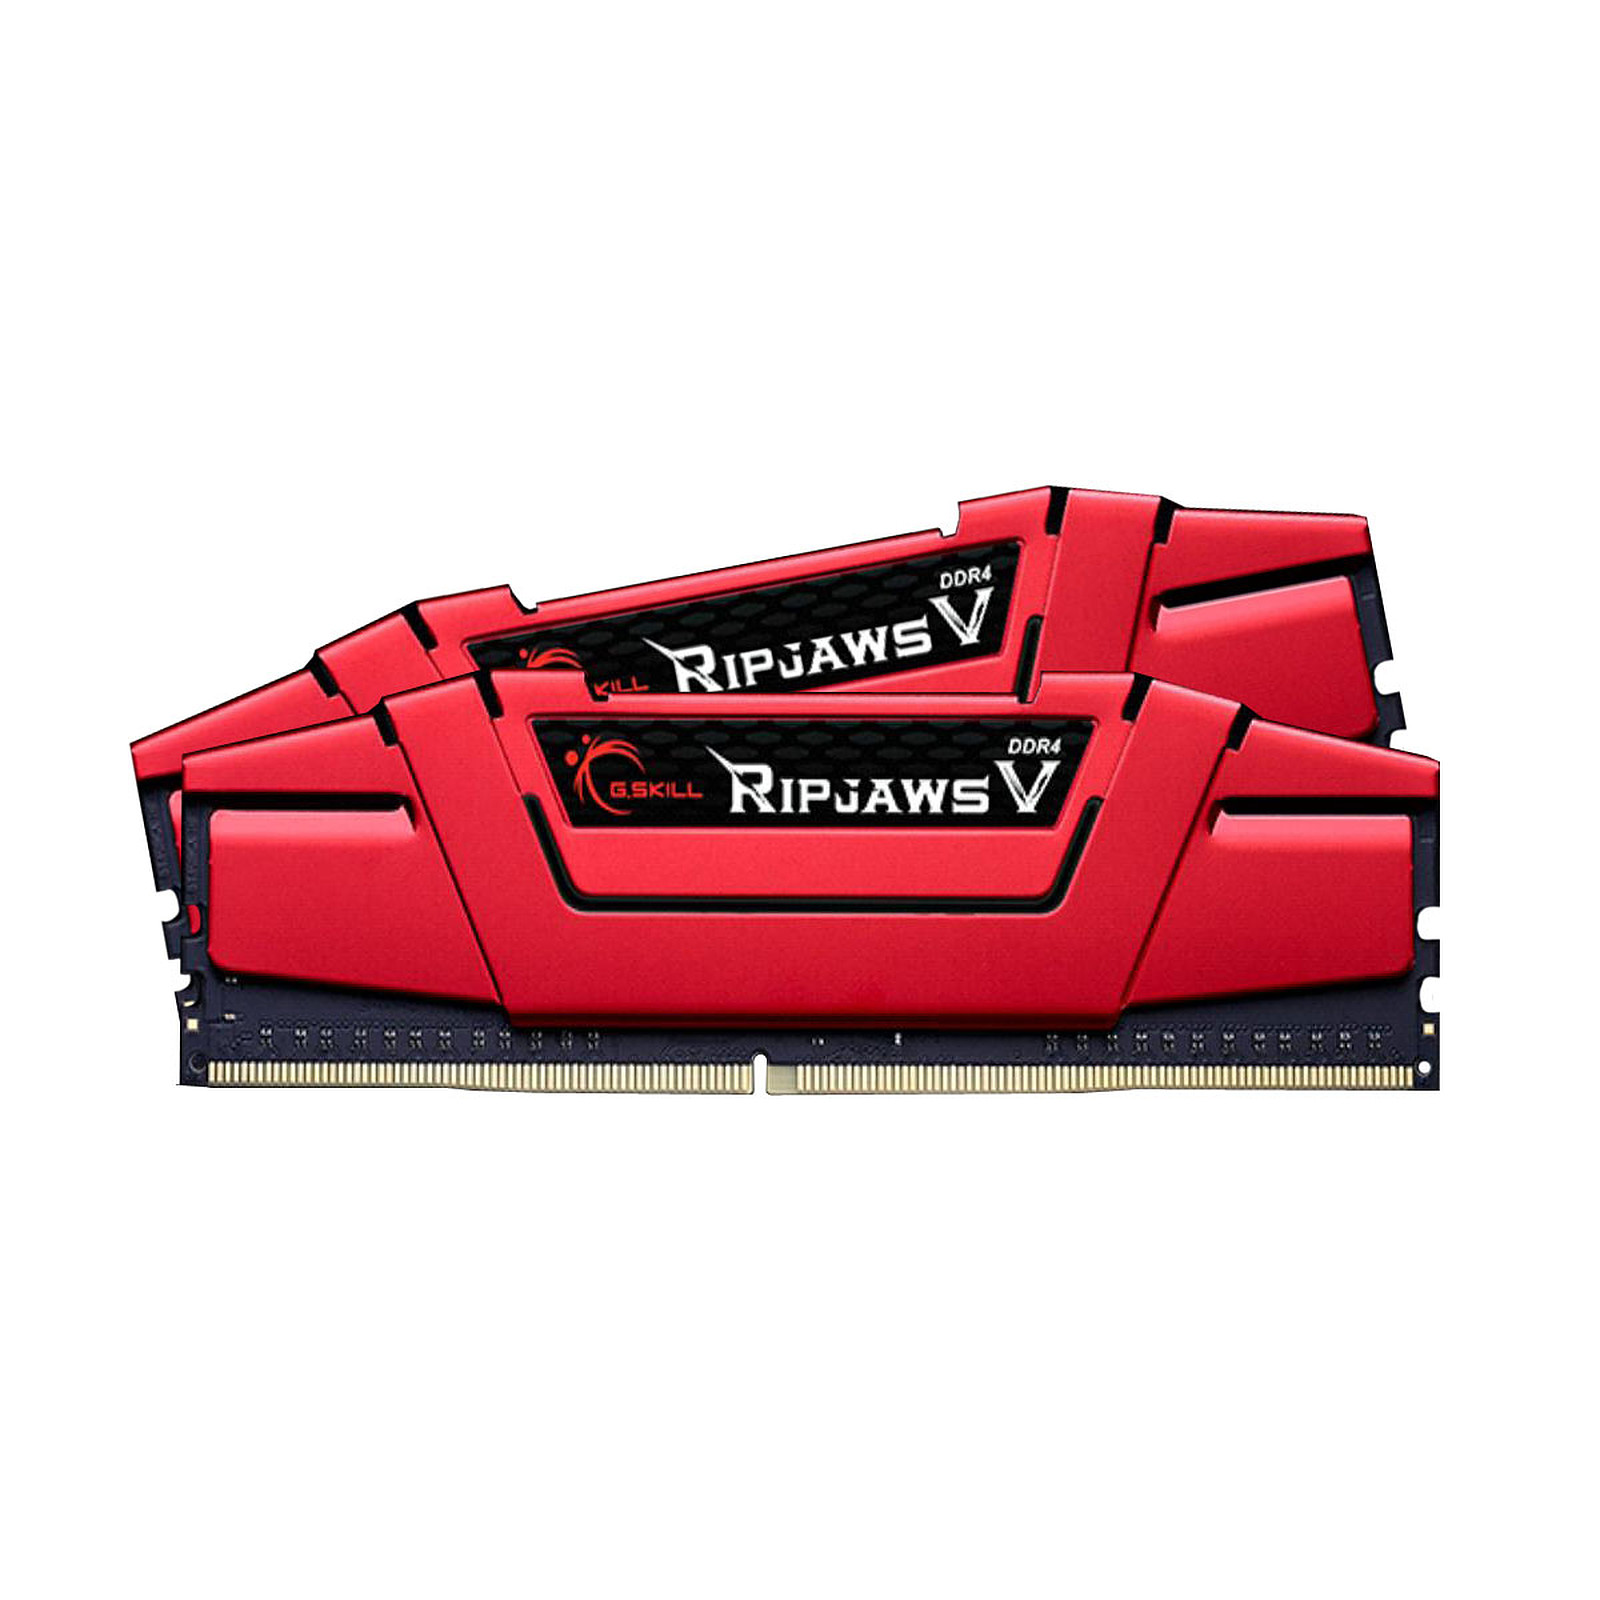 G.Skill RipJaws 5 Series Rouge 8 Go (2x 4 Go) DDR4 2400 MHz CL17 - Memoire PC G.Skill